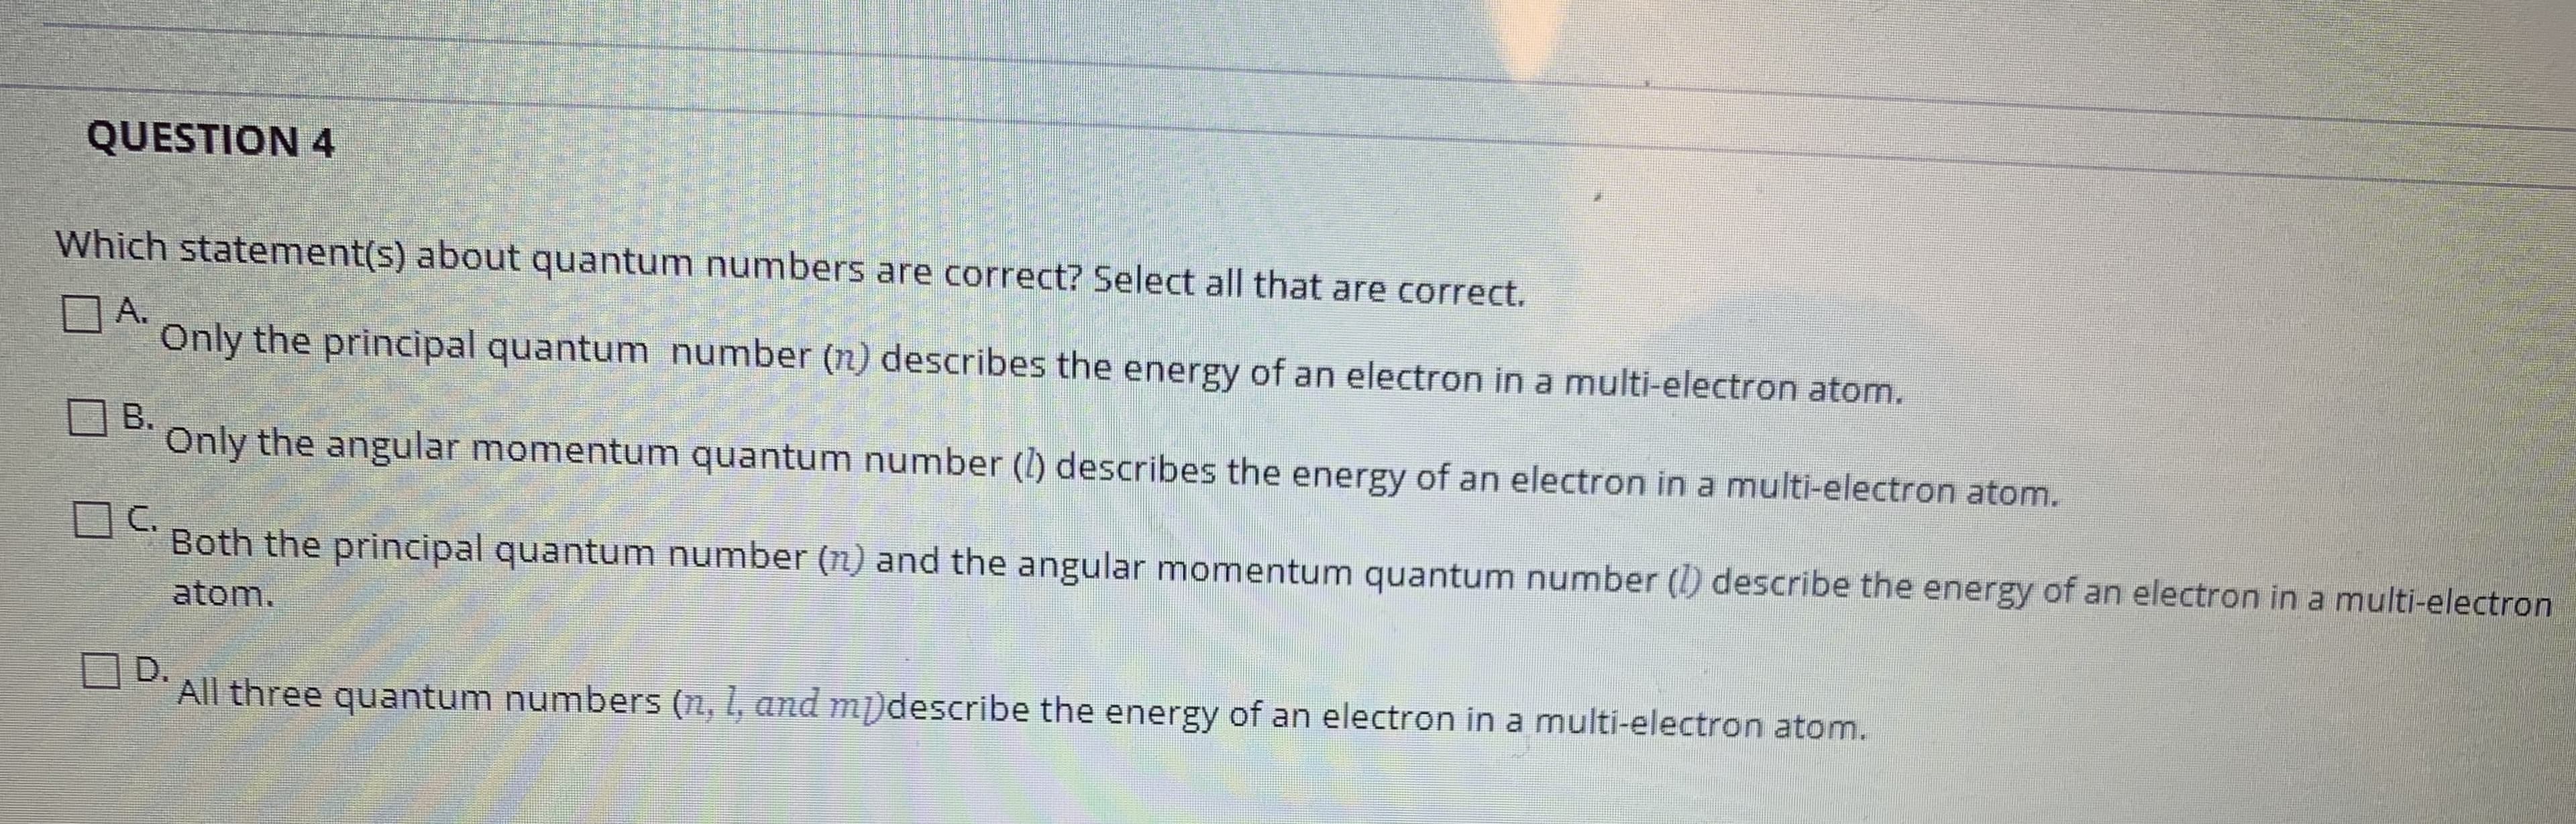 Which statement(s) about quantum numbers are correct? Select all that are correct.
A.
Only the principal quantum number (n) describes the energy of an electron in a multi-electron atom.
